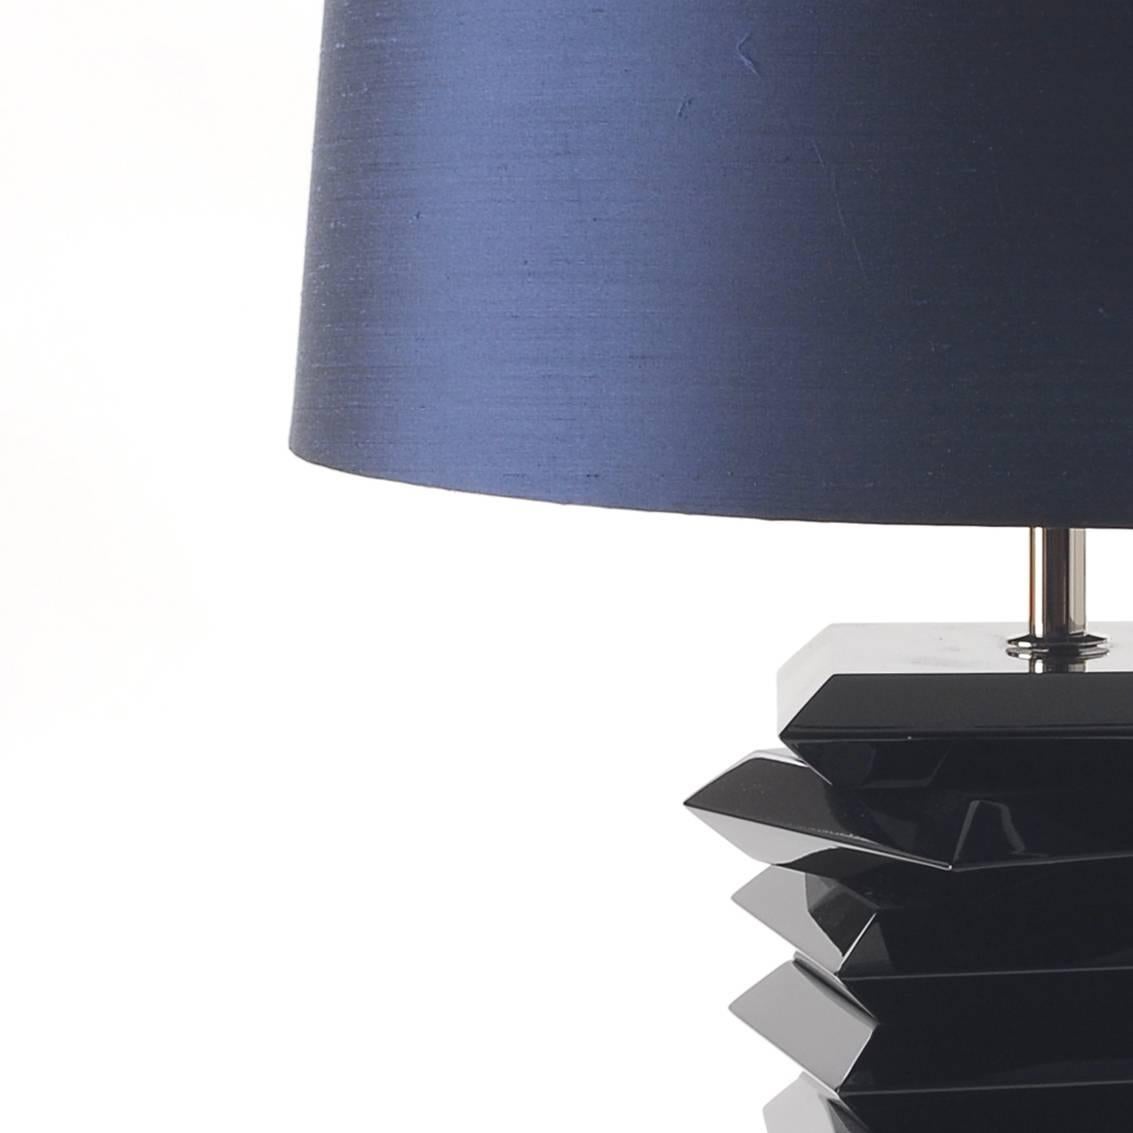 With its geometric form and Classic size, Tribeca desk lamp is the
perfect addition to any modern décor, easily converted from a table
lamp to a bedside lamp. It's masculine character goes along well with
the warm natural coloring of the shade